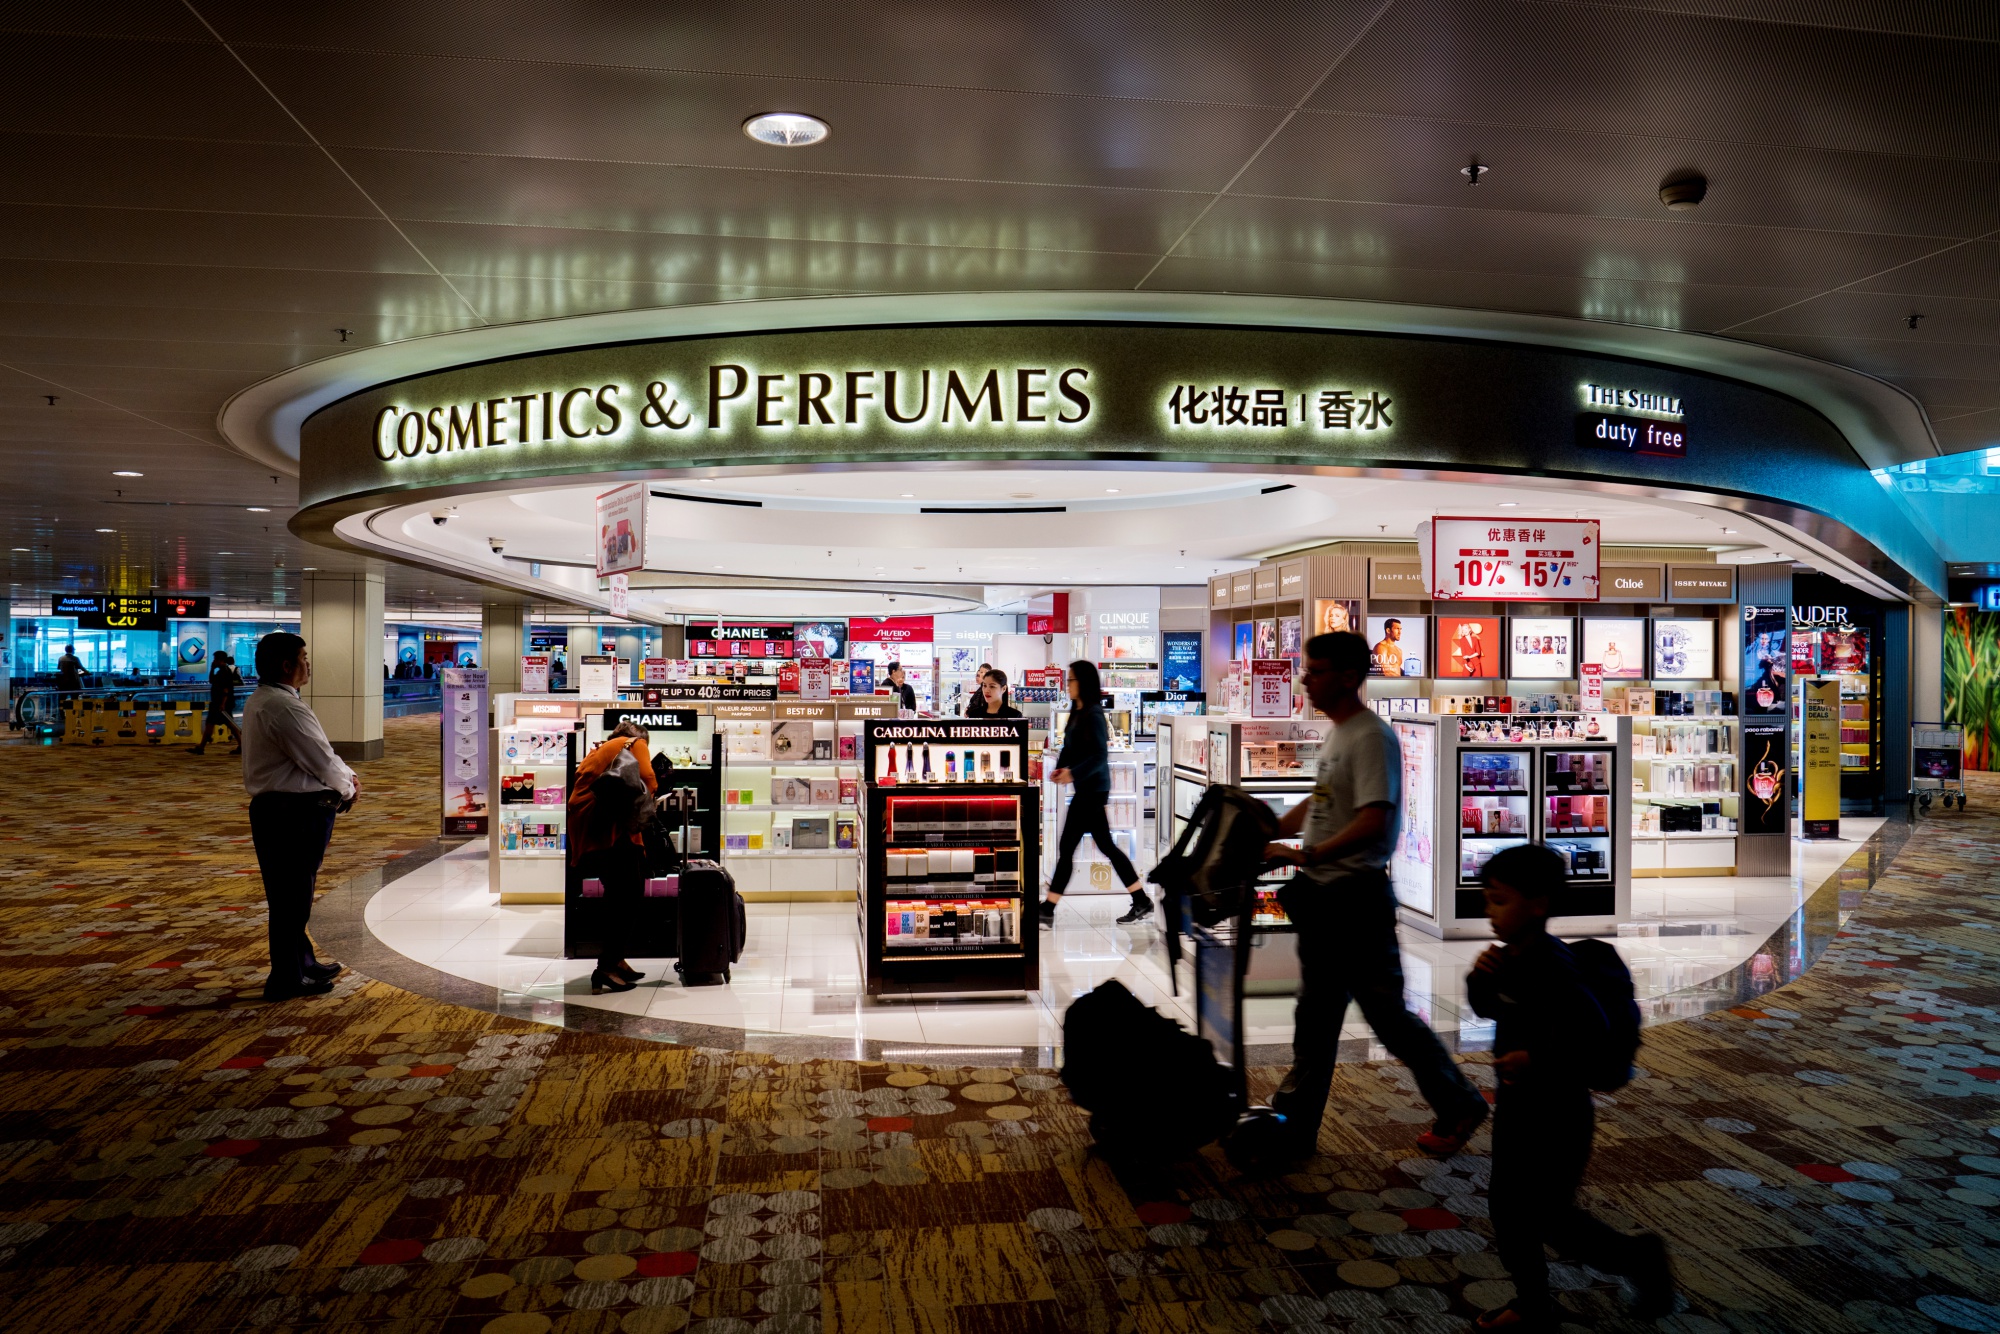 Duty free operator DFS pulls out of Singapore over regulatory tightening